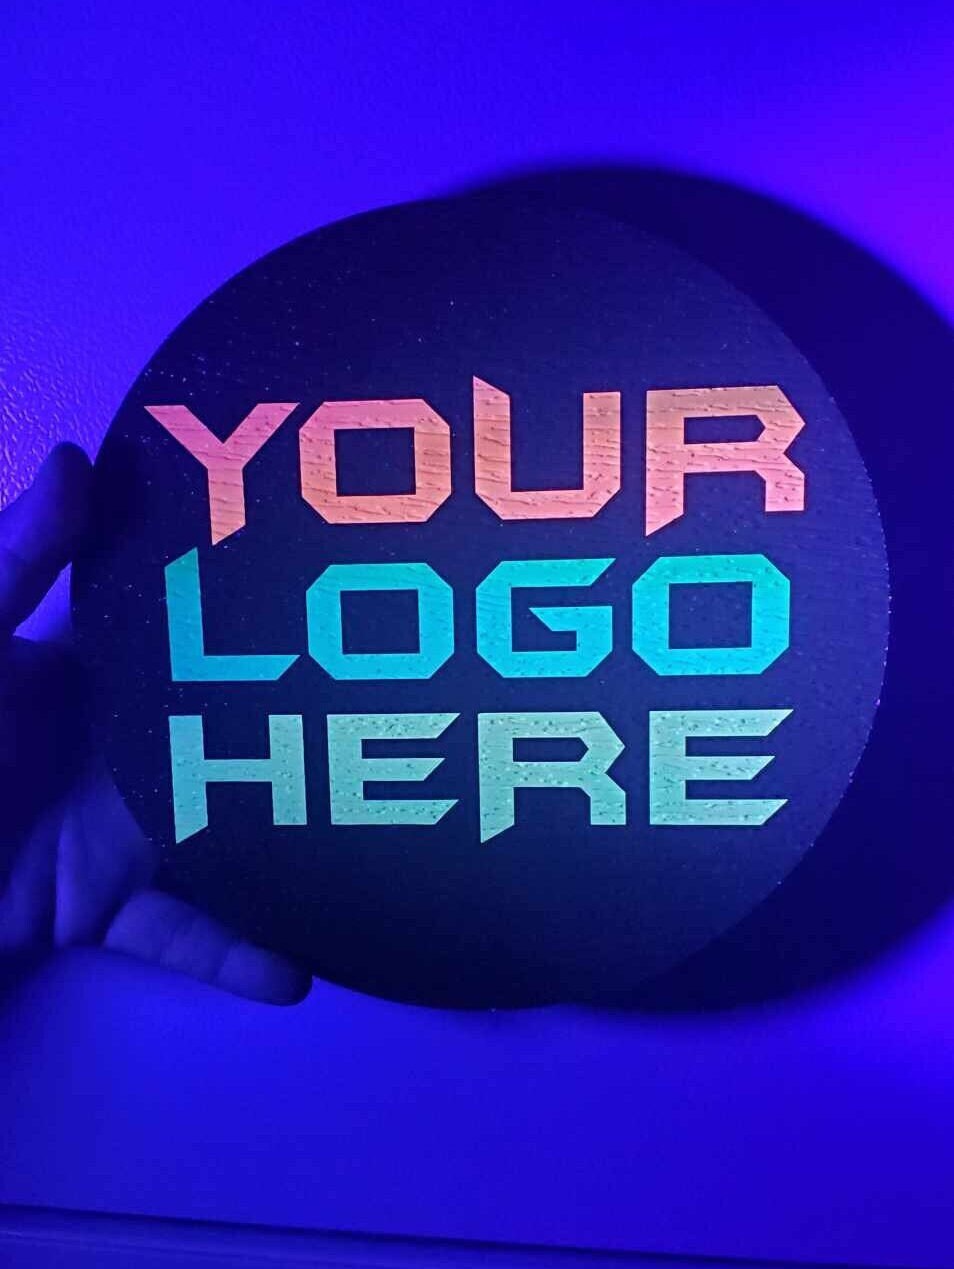 Laser Tag Putt Putt Golf Night Club Custom Personalized Black Light Sign UV Printed Fluorescent Glow Look Your Logo Image Wood Ultraviolet